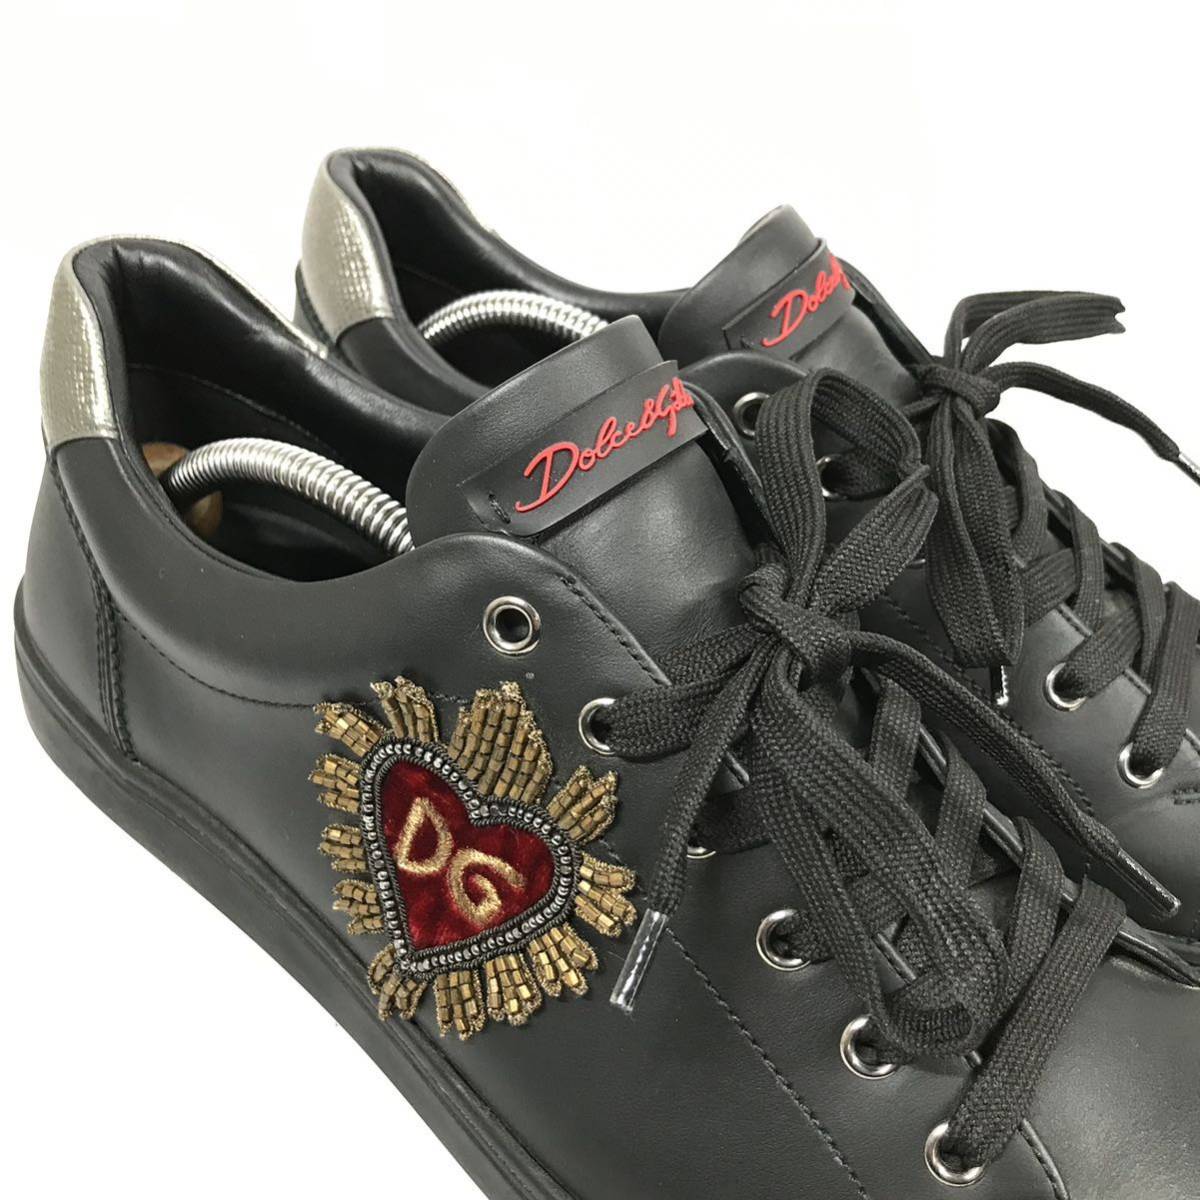 [ Dolce & Gabbana ] genuine article DOLCE&GABBANA shoes 28cm black DG Logo sneakers casual shoes original leather for man men's Italy made 9